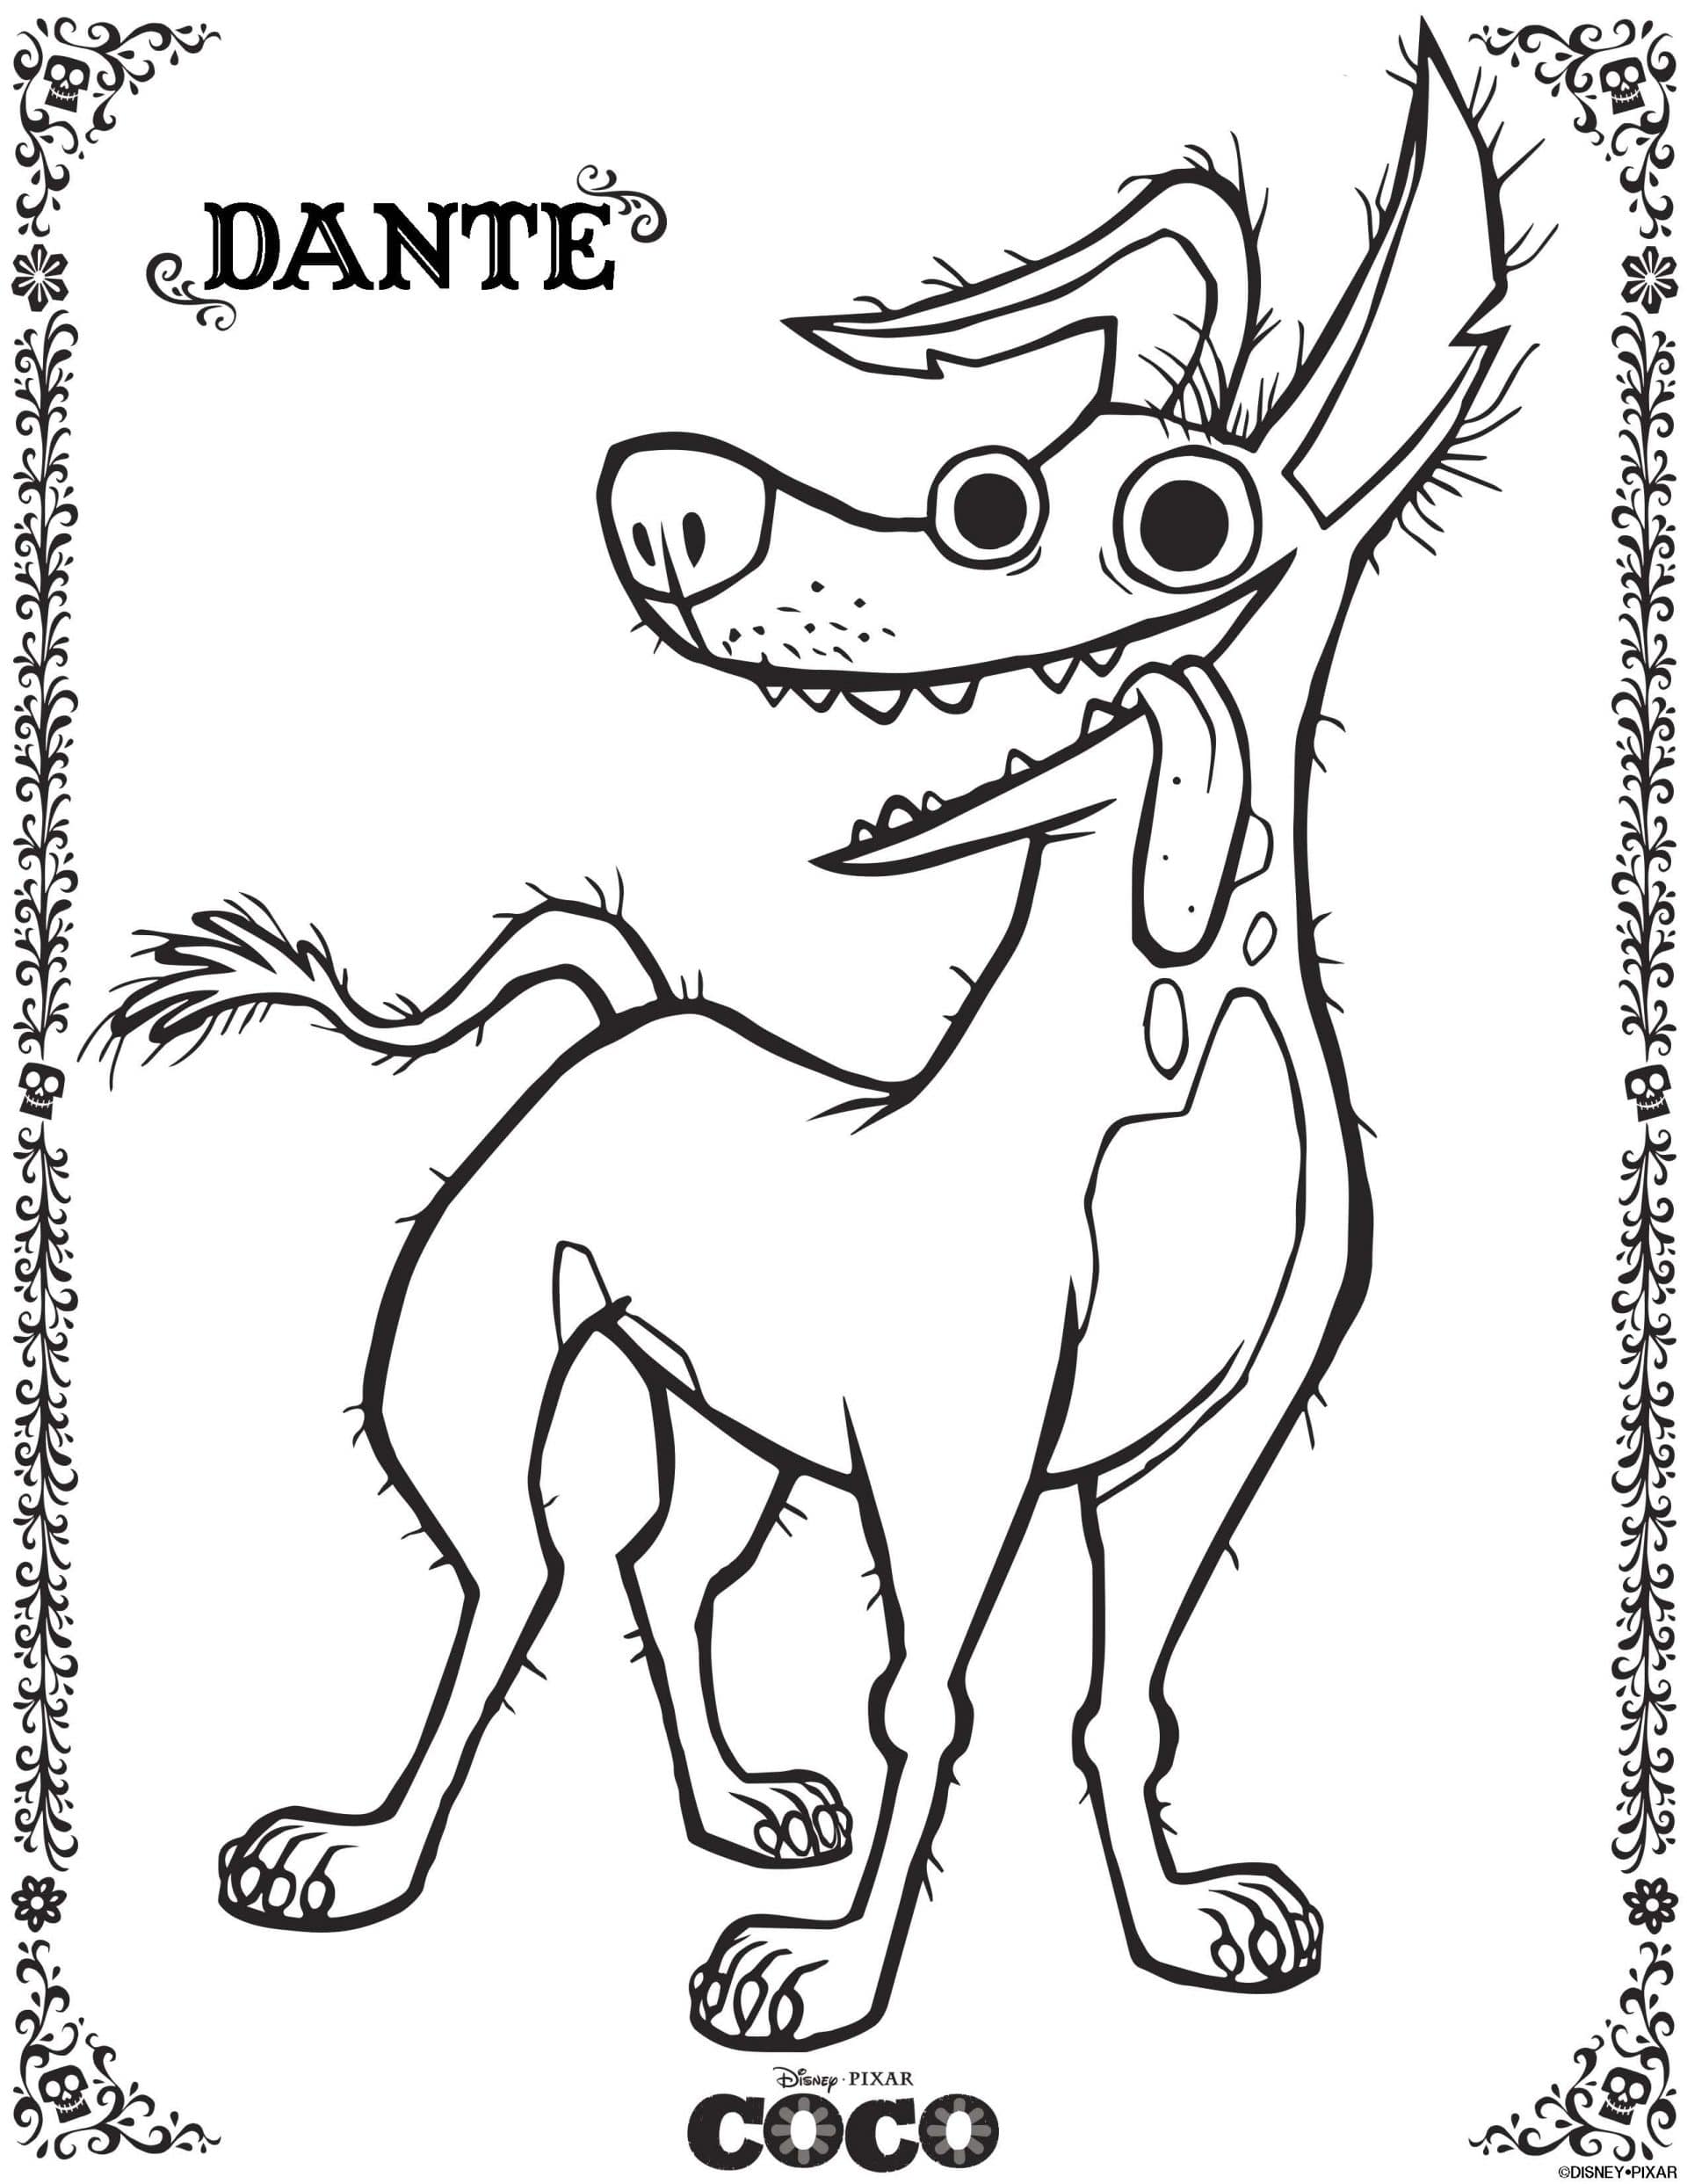 Coco Coloring Pages - Dante Coloring Page